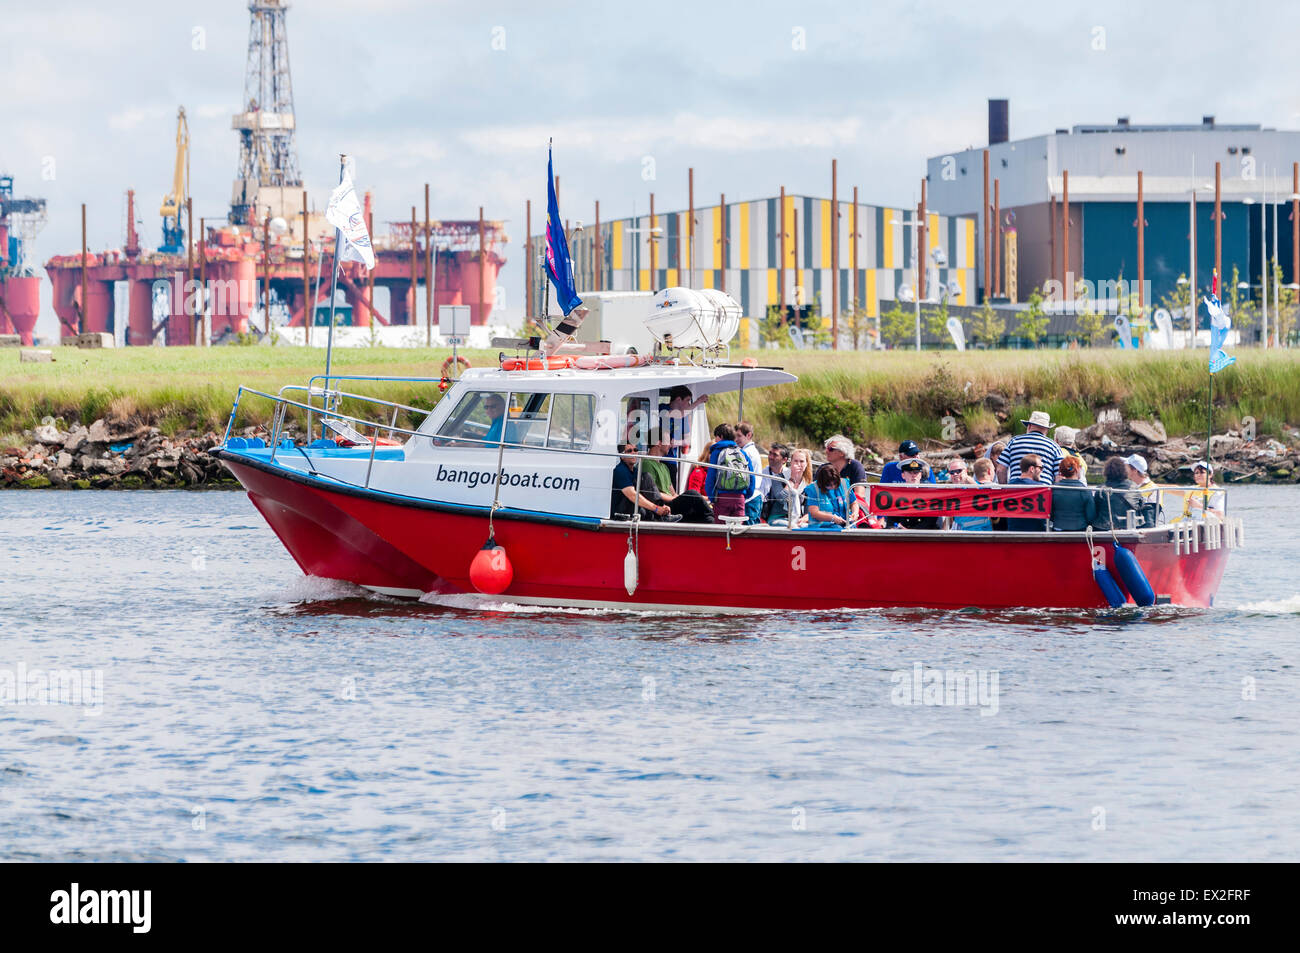 The Ocean Crest (Bangor Boat Company) takes passengers on a trip around the Titanic Quarter, Belfast in a river taxi Stock Photo